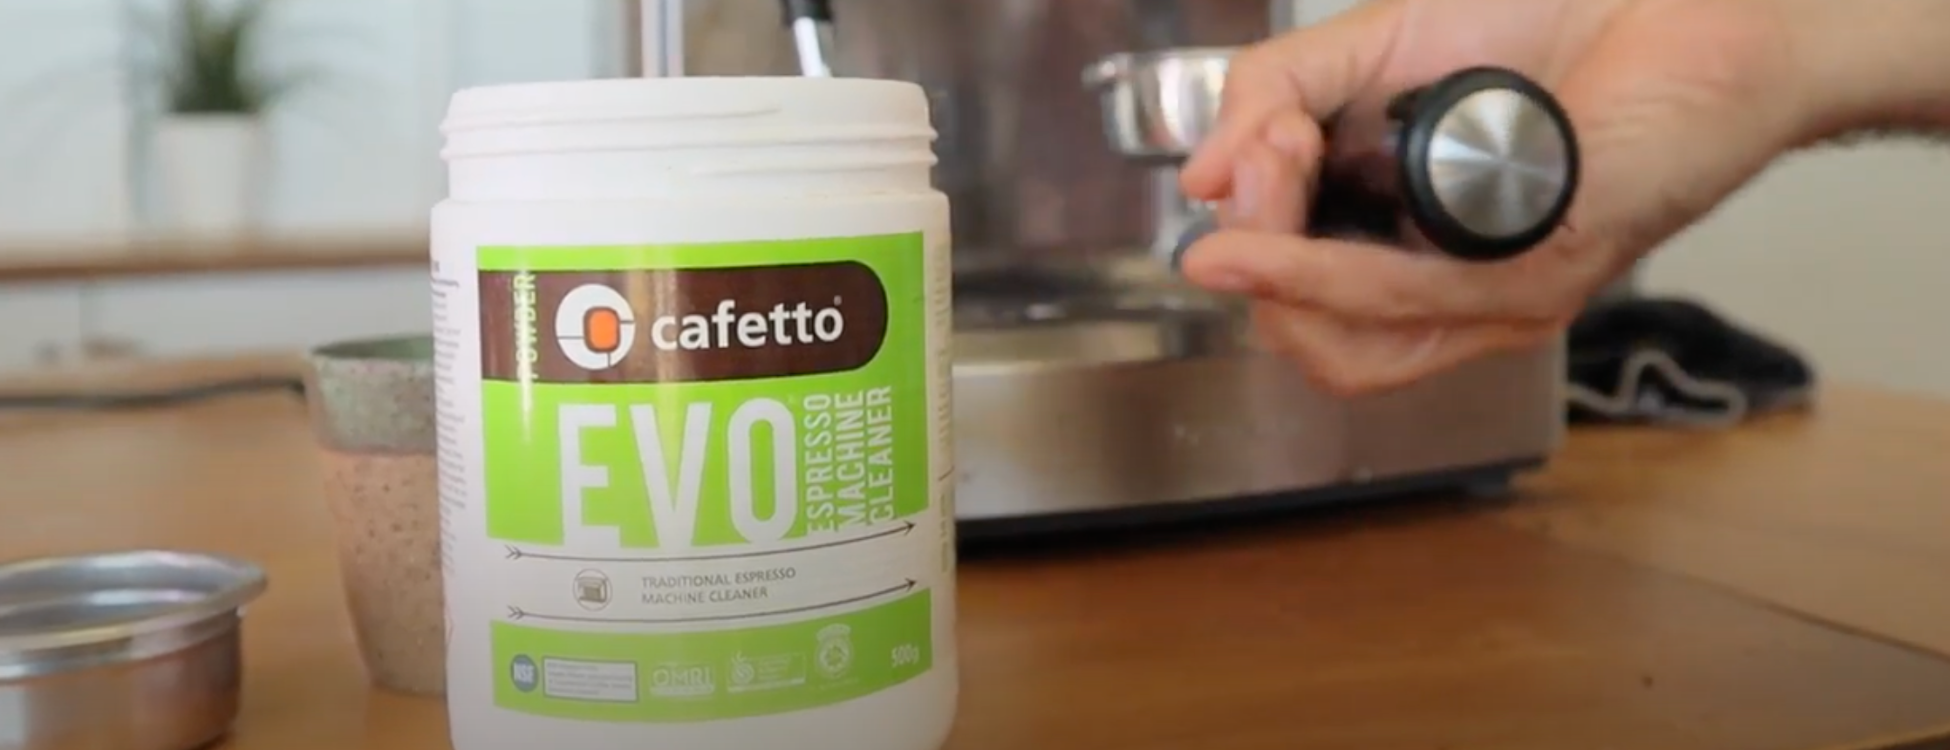 Cafetto Tub with espresso machine being cleans in the background